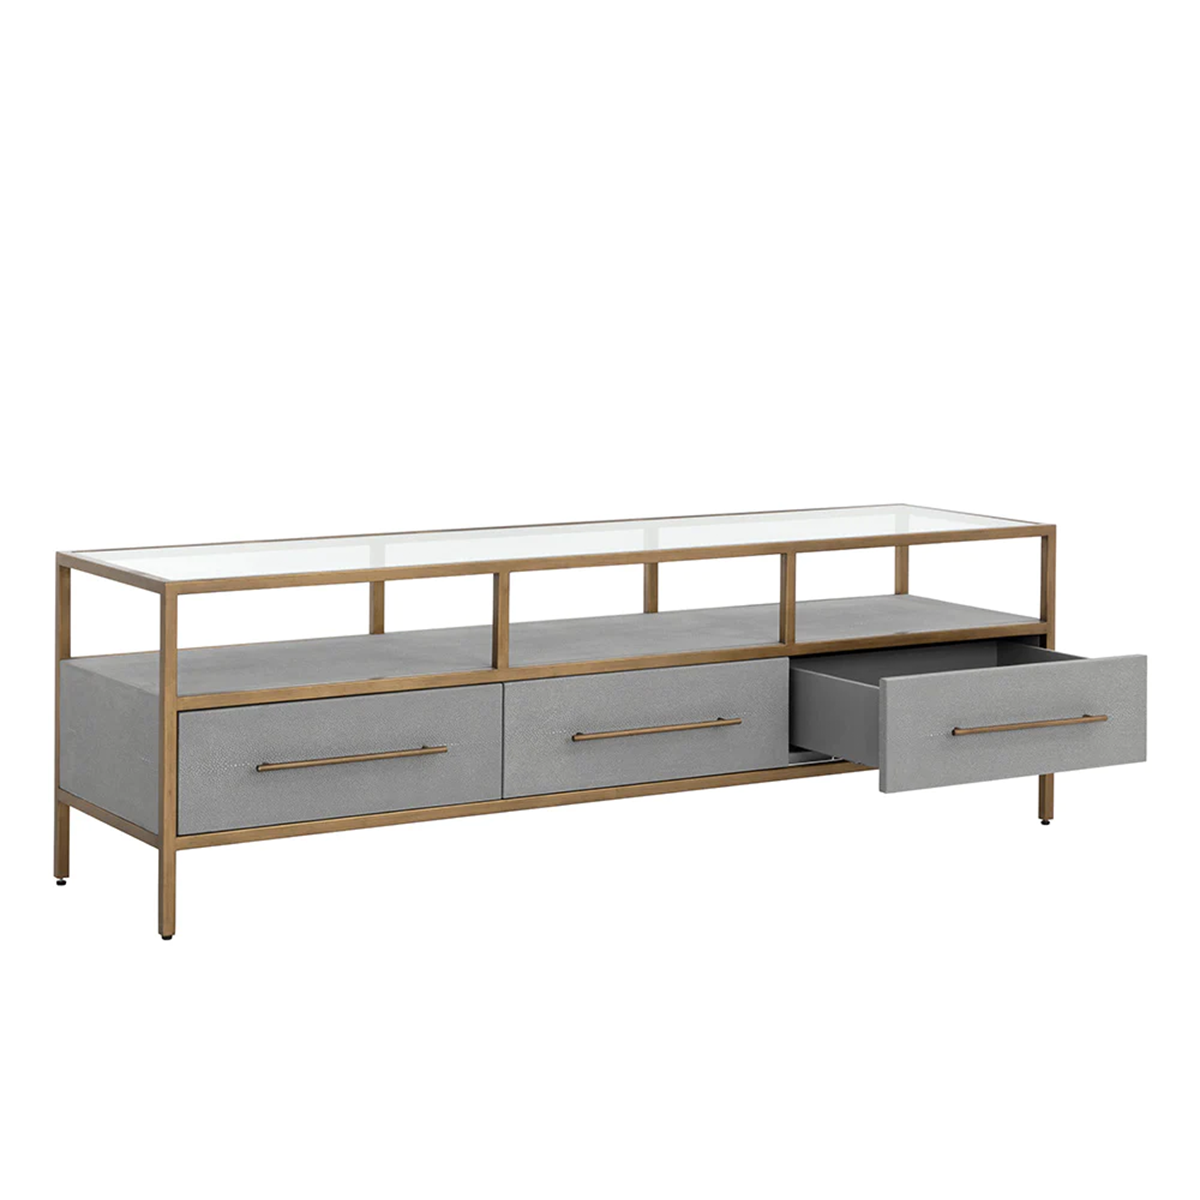 Venice Media Console and Cabinet by Sunpan with open drawer